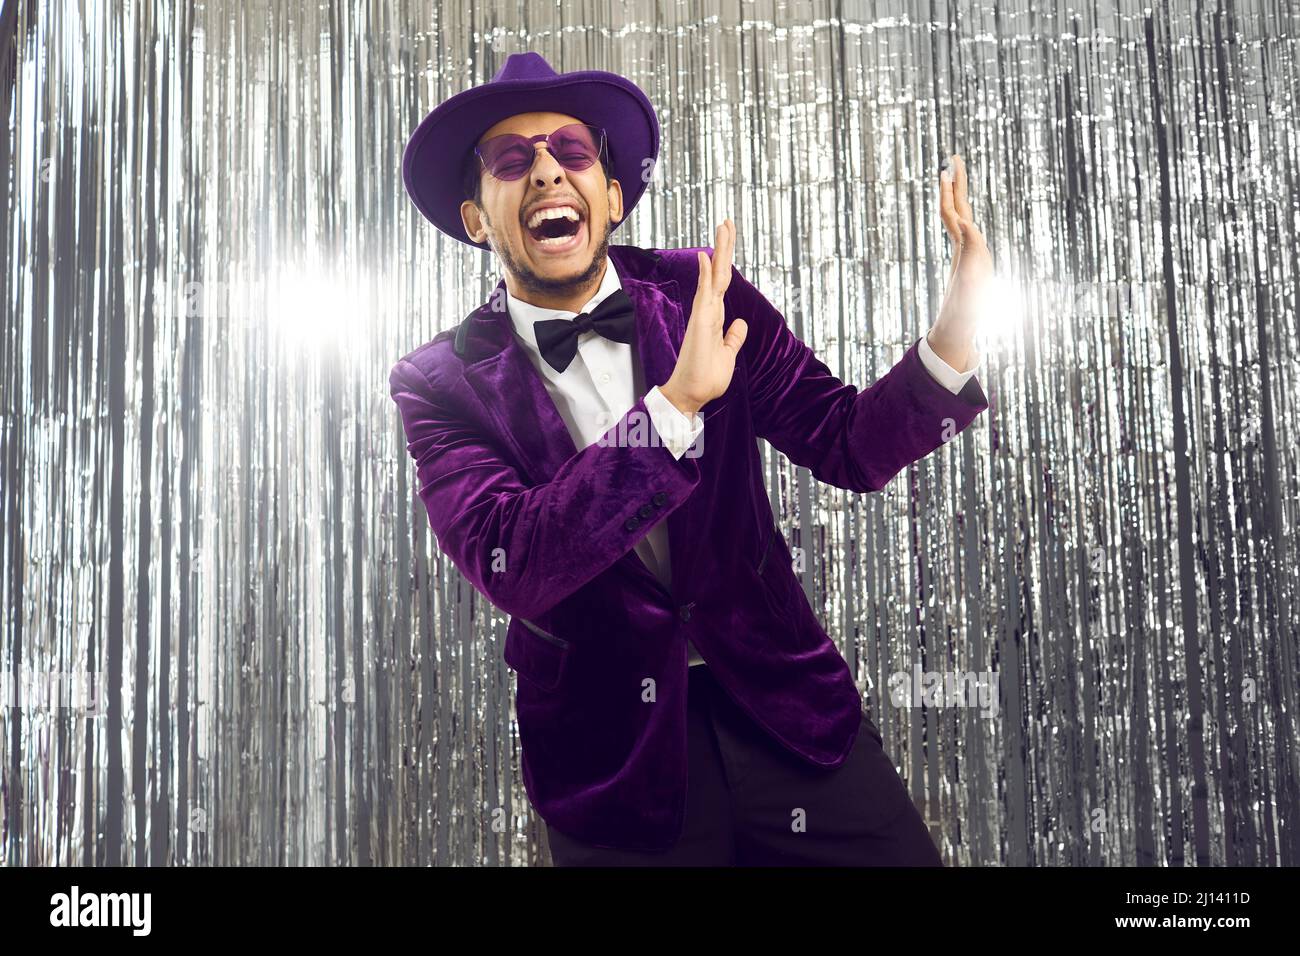 Happy funny goofy man in a purple suit, glasses and hat dancing and laughing at a party Stock Photo